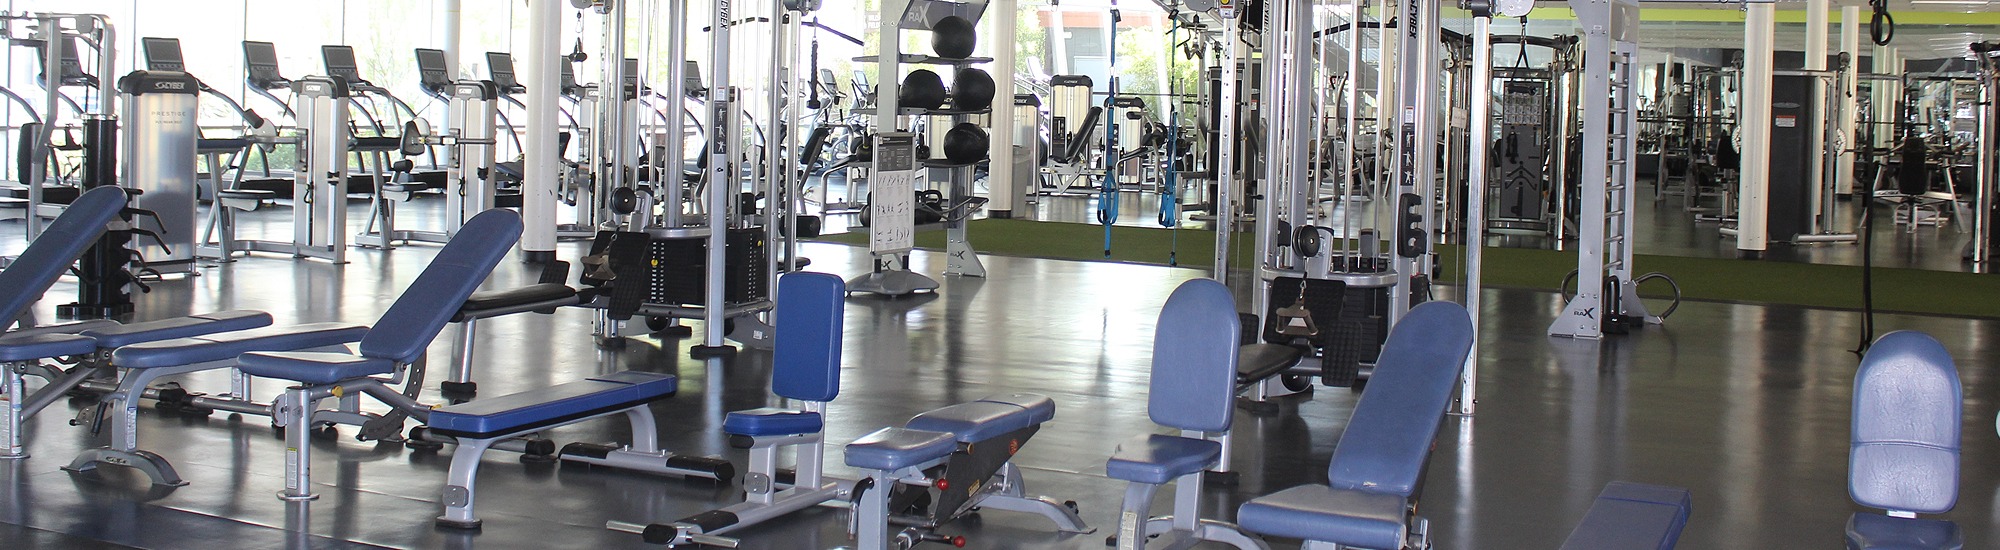 Fitness space full of weight lifting and cardio equipment at Campus Rec, UArizona